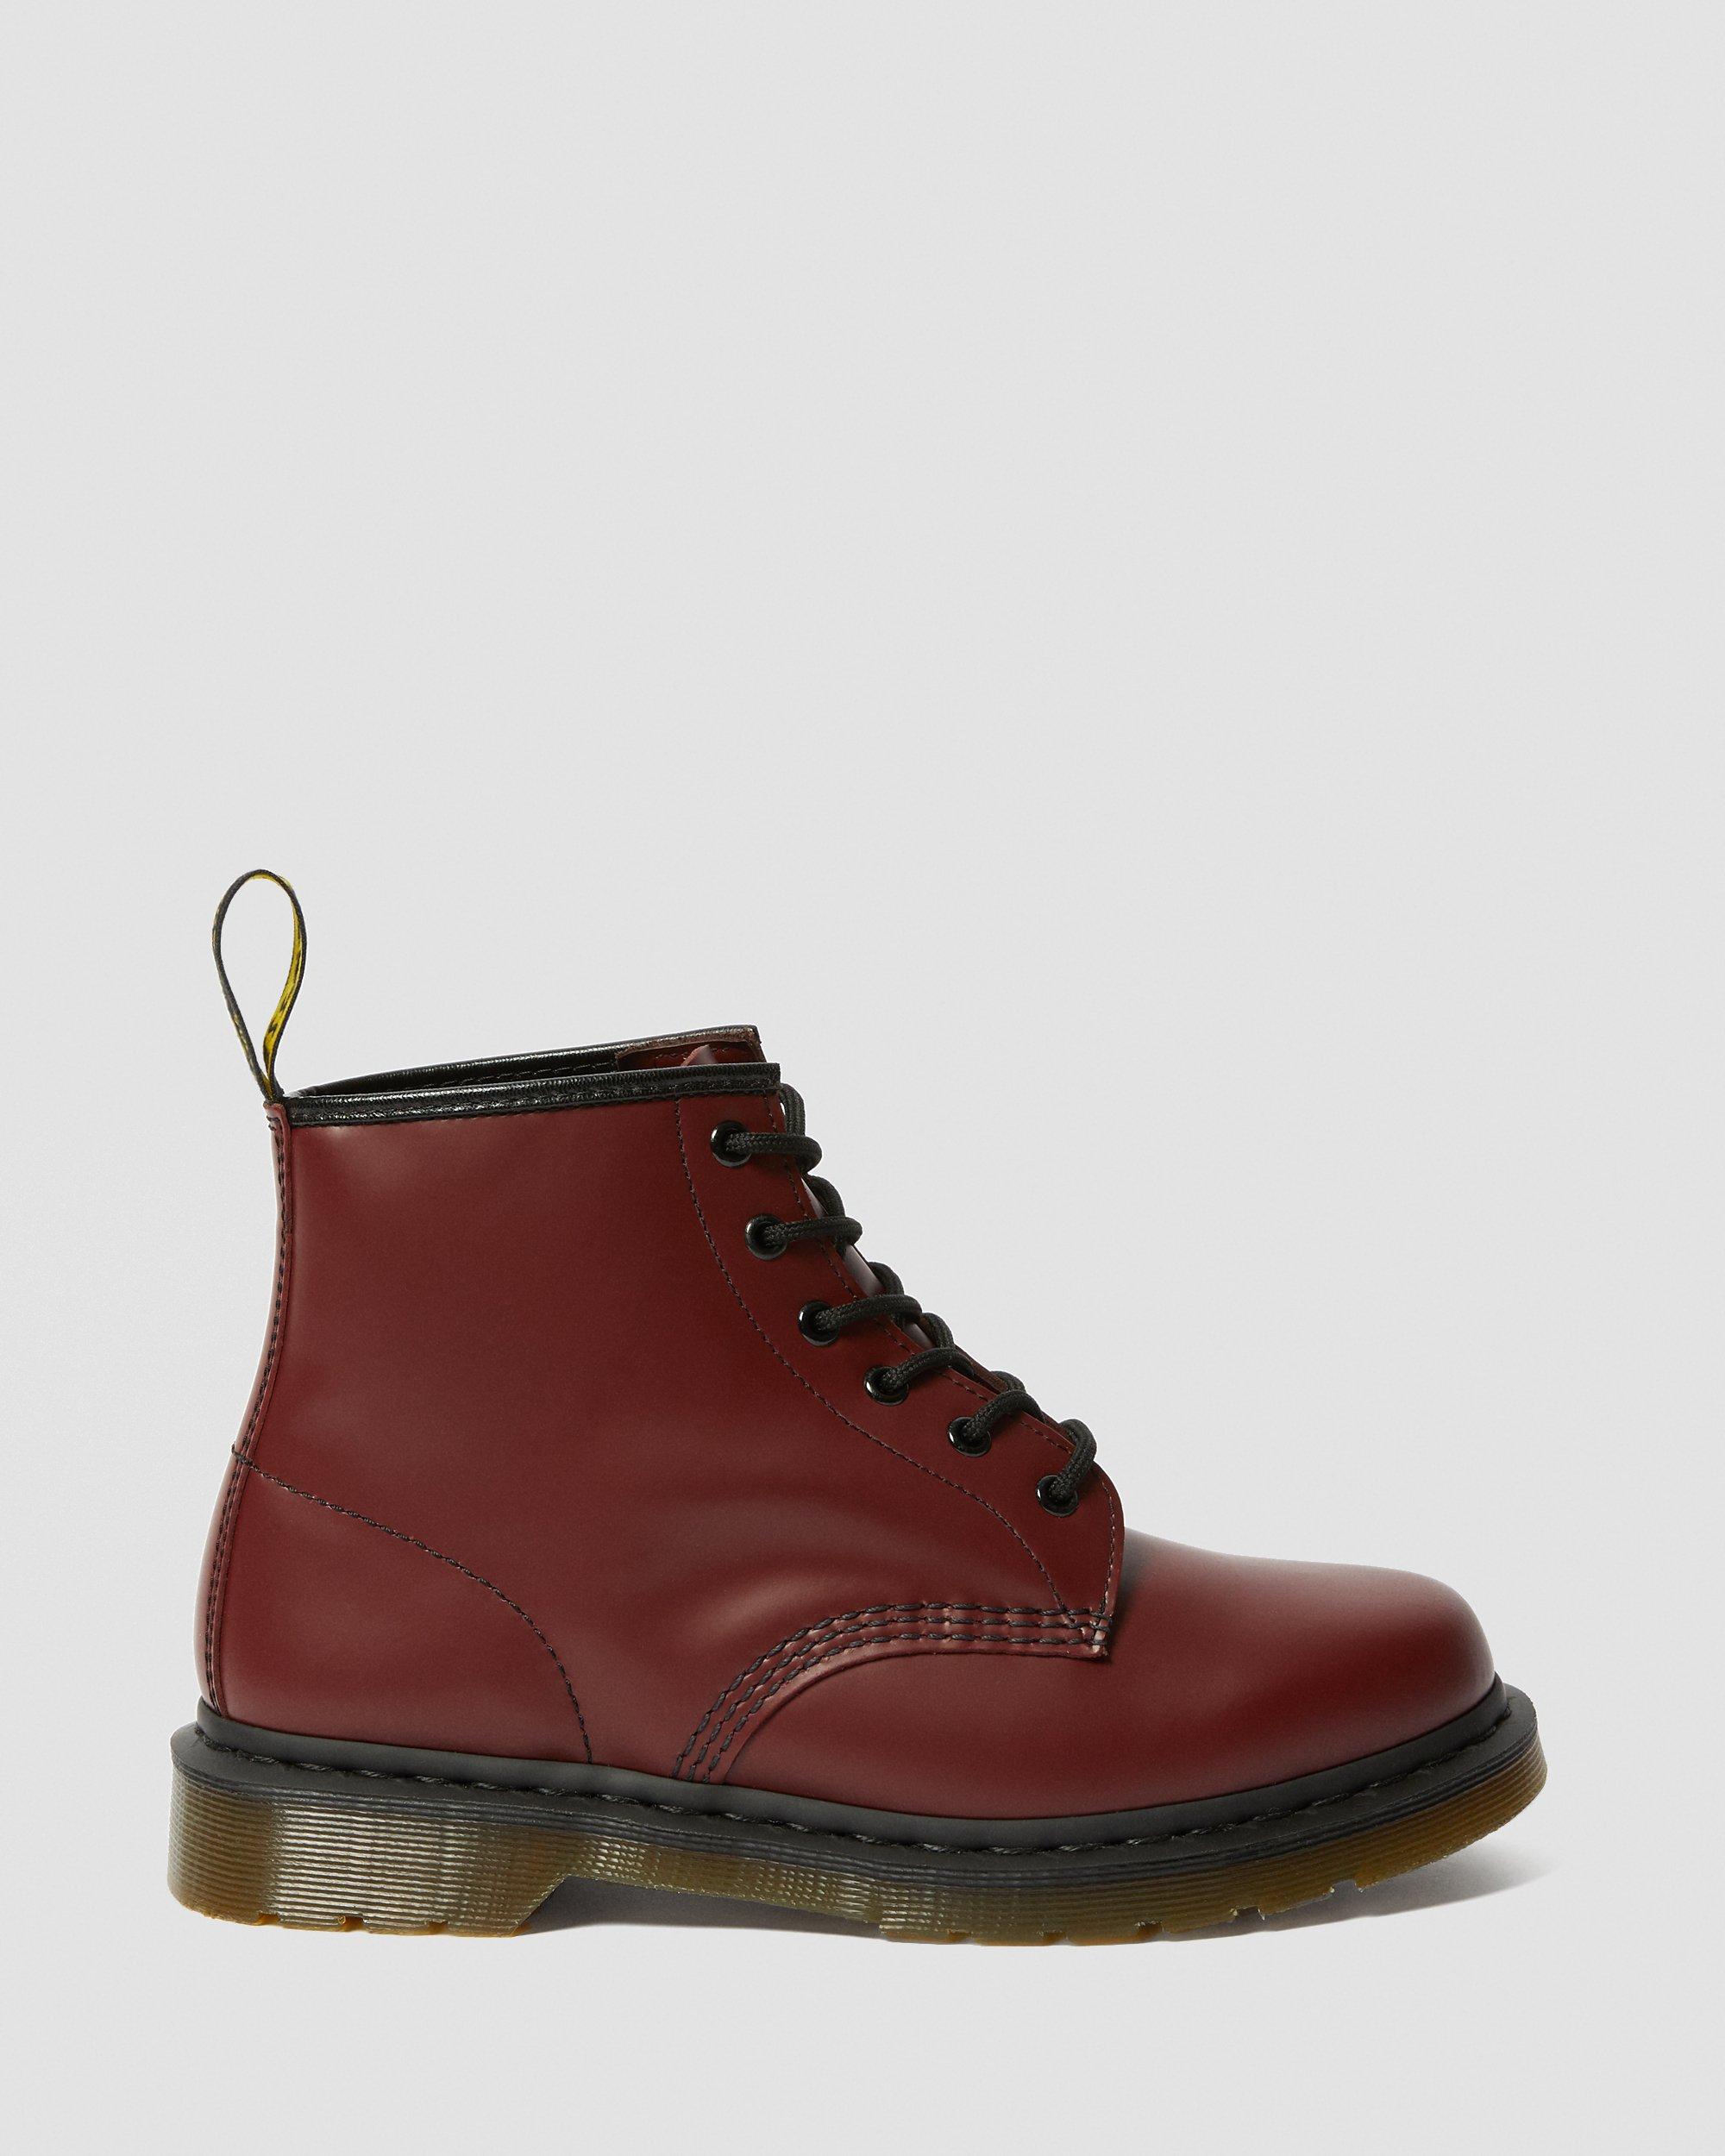 101 SMOOTH LEATHER ANKLE BOOTS Dr. Martens